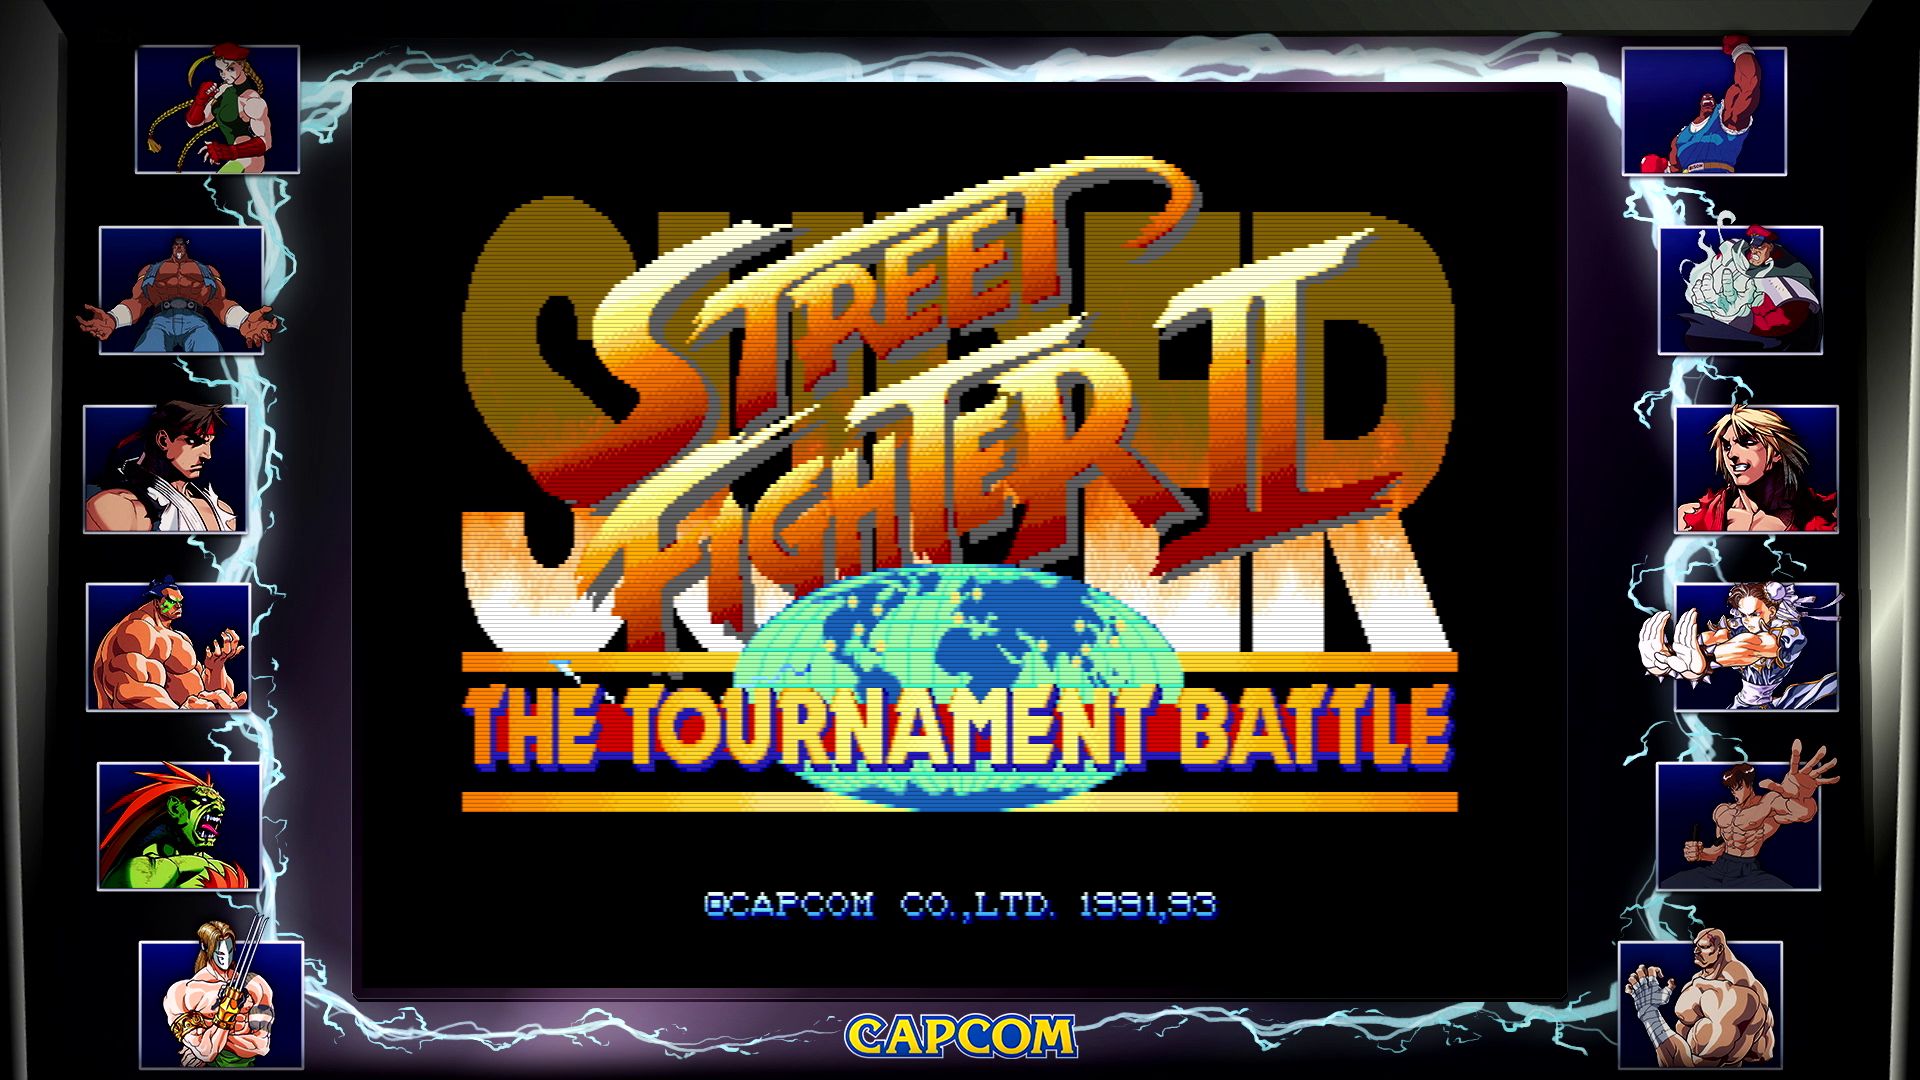 Image for Street Fighter 30th Anniversary: PC, PS4, Xbox One pre-orders include Ultra Street Fighter 4, Switch gets Super Street Fighter 2: The Tournament Battle